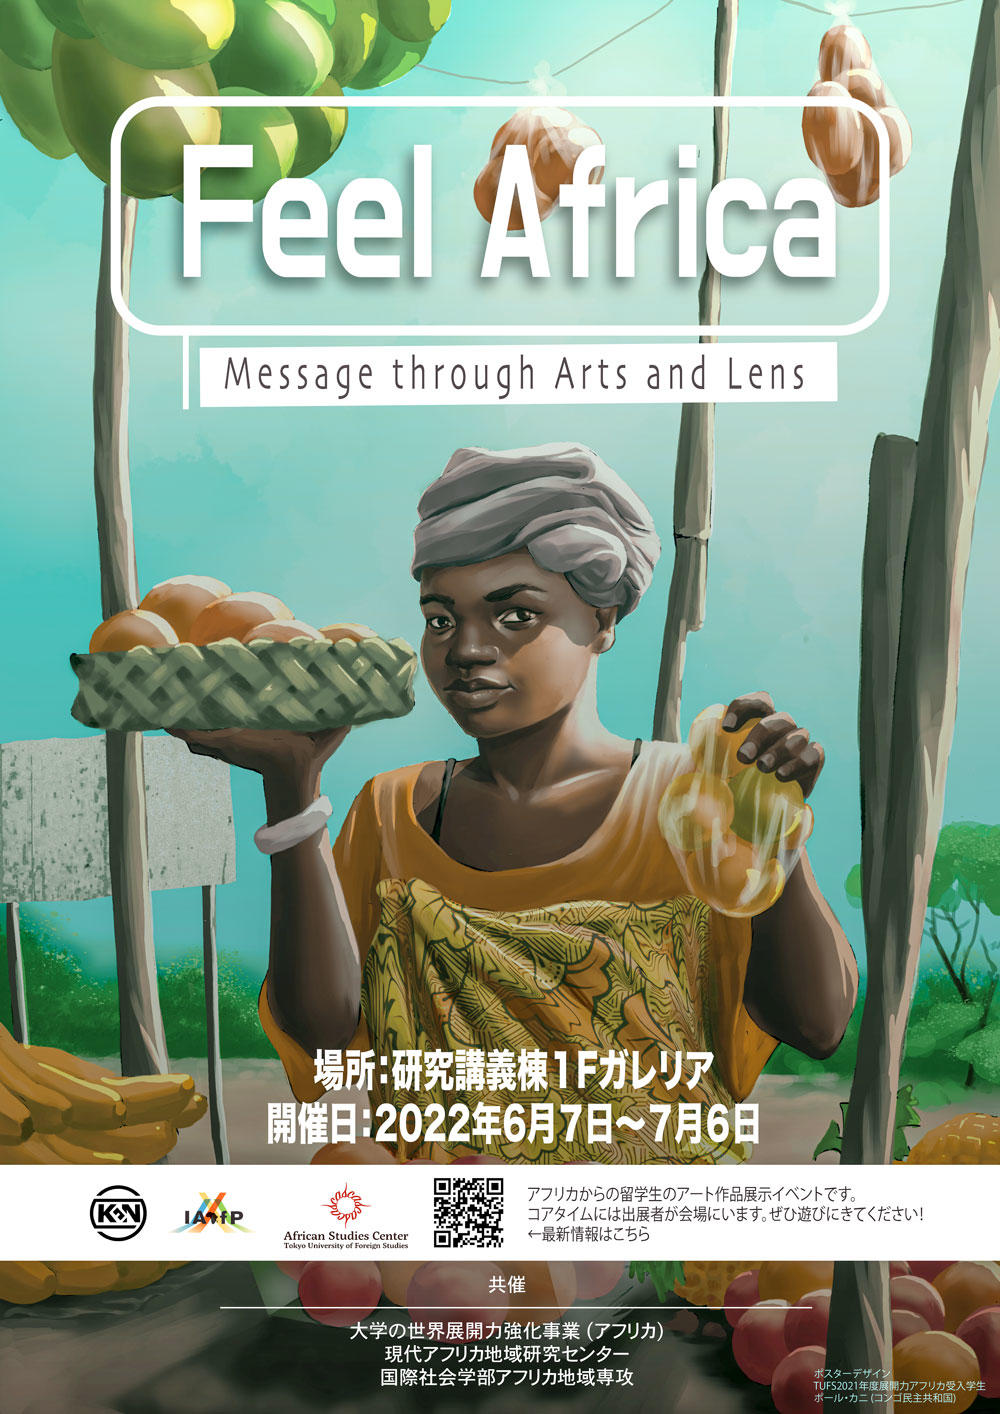 【TUFS学内限定】アフリカ留学生作品展「Feel Africa: Message Through Arts and Lens」